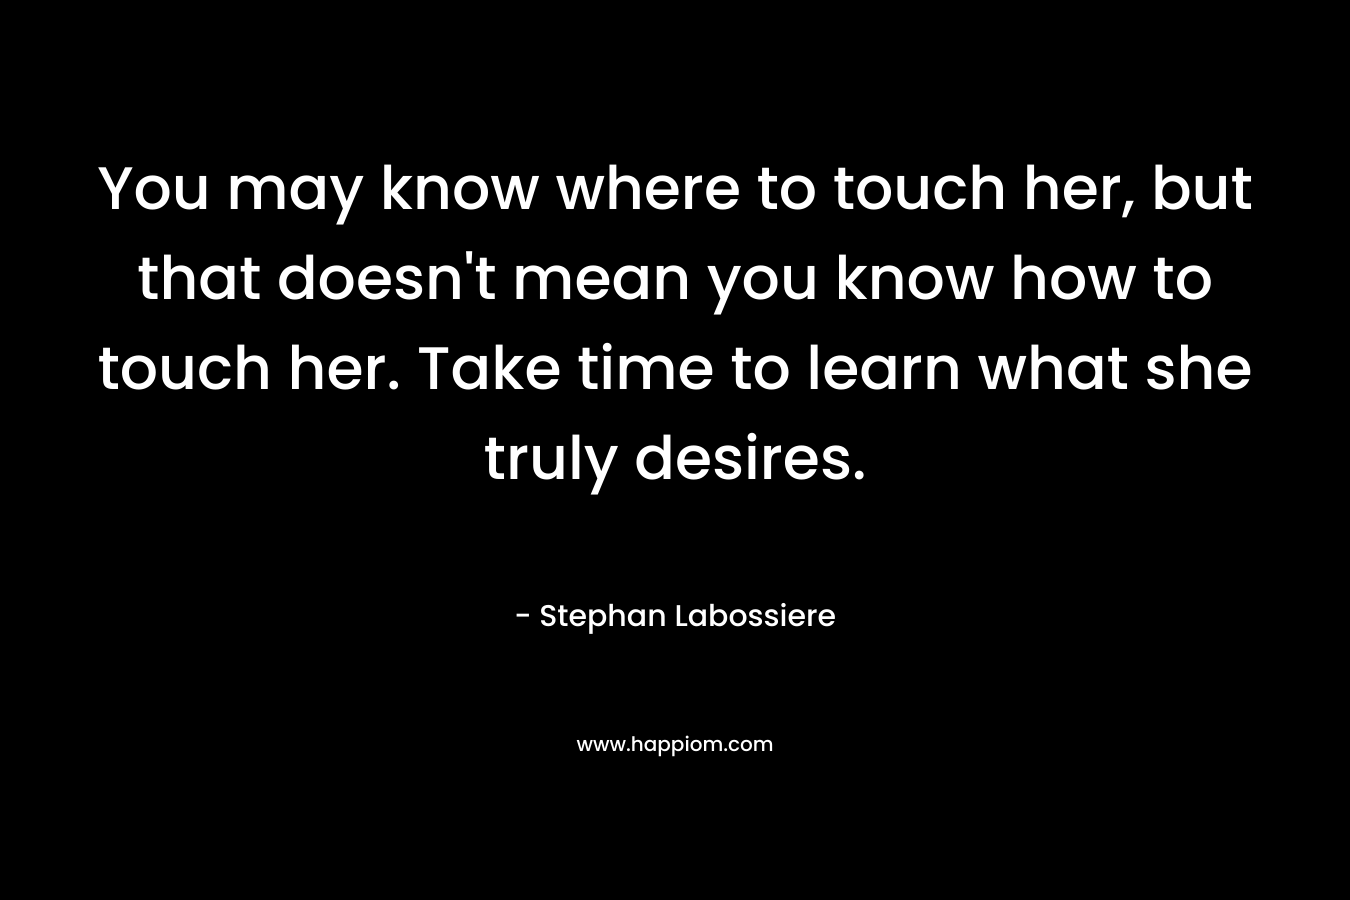 You may know where to touch her, but that doesn't mean you know how to touch her. Take time to learn what she truly desires.